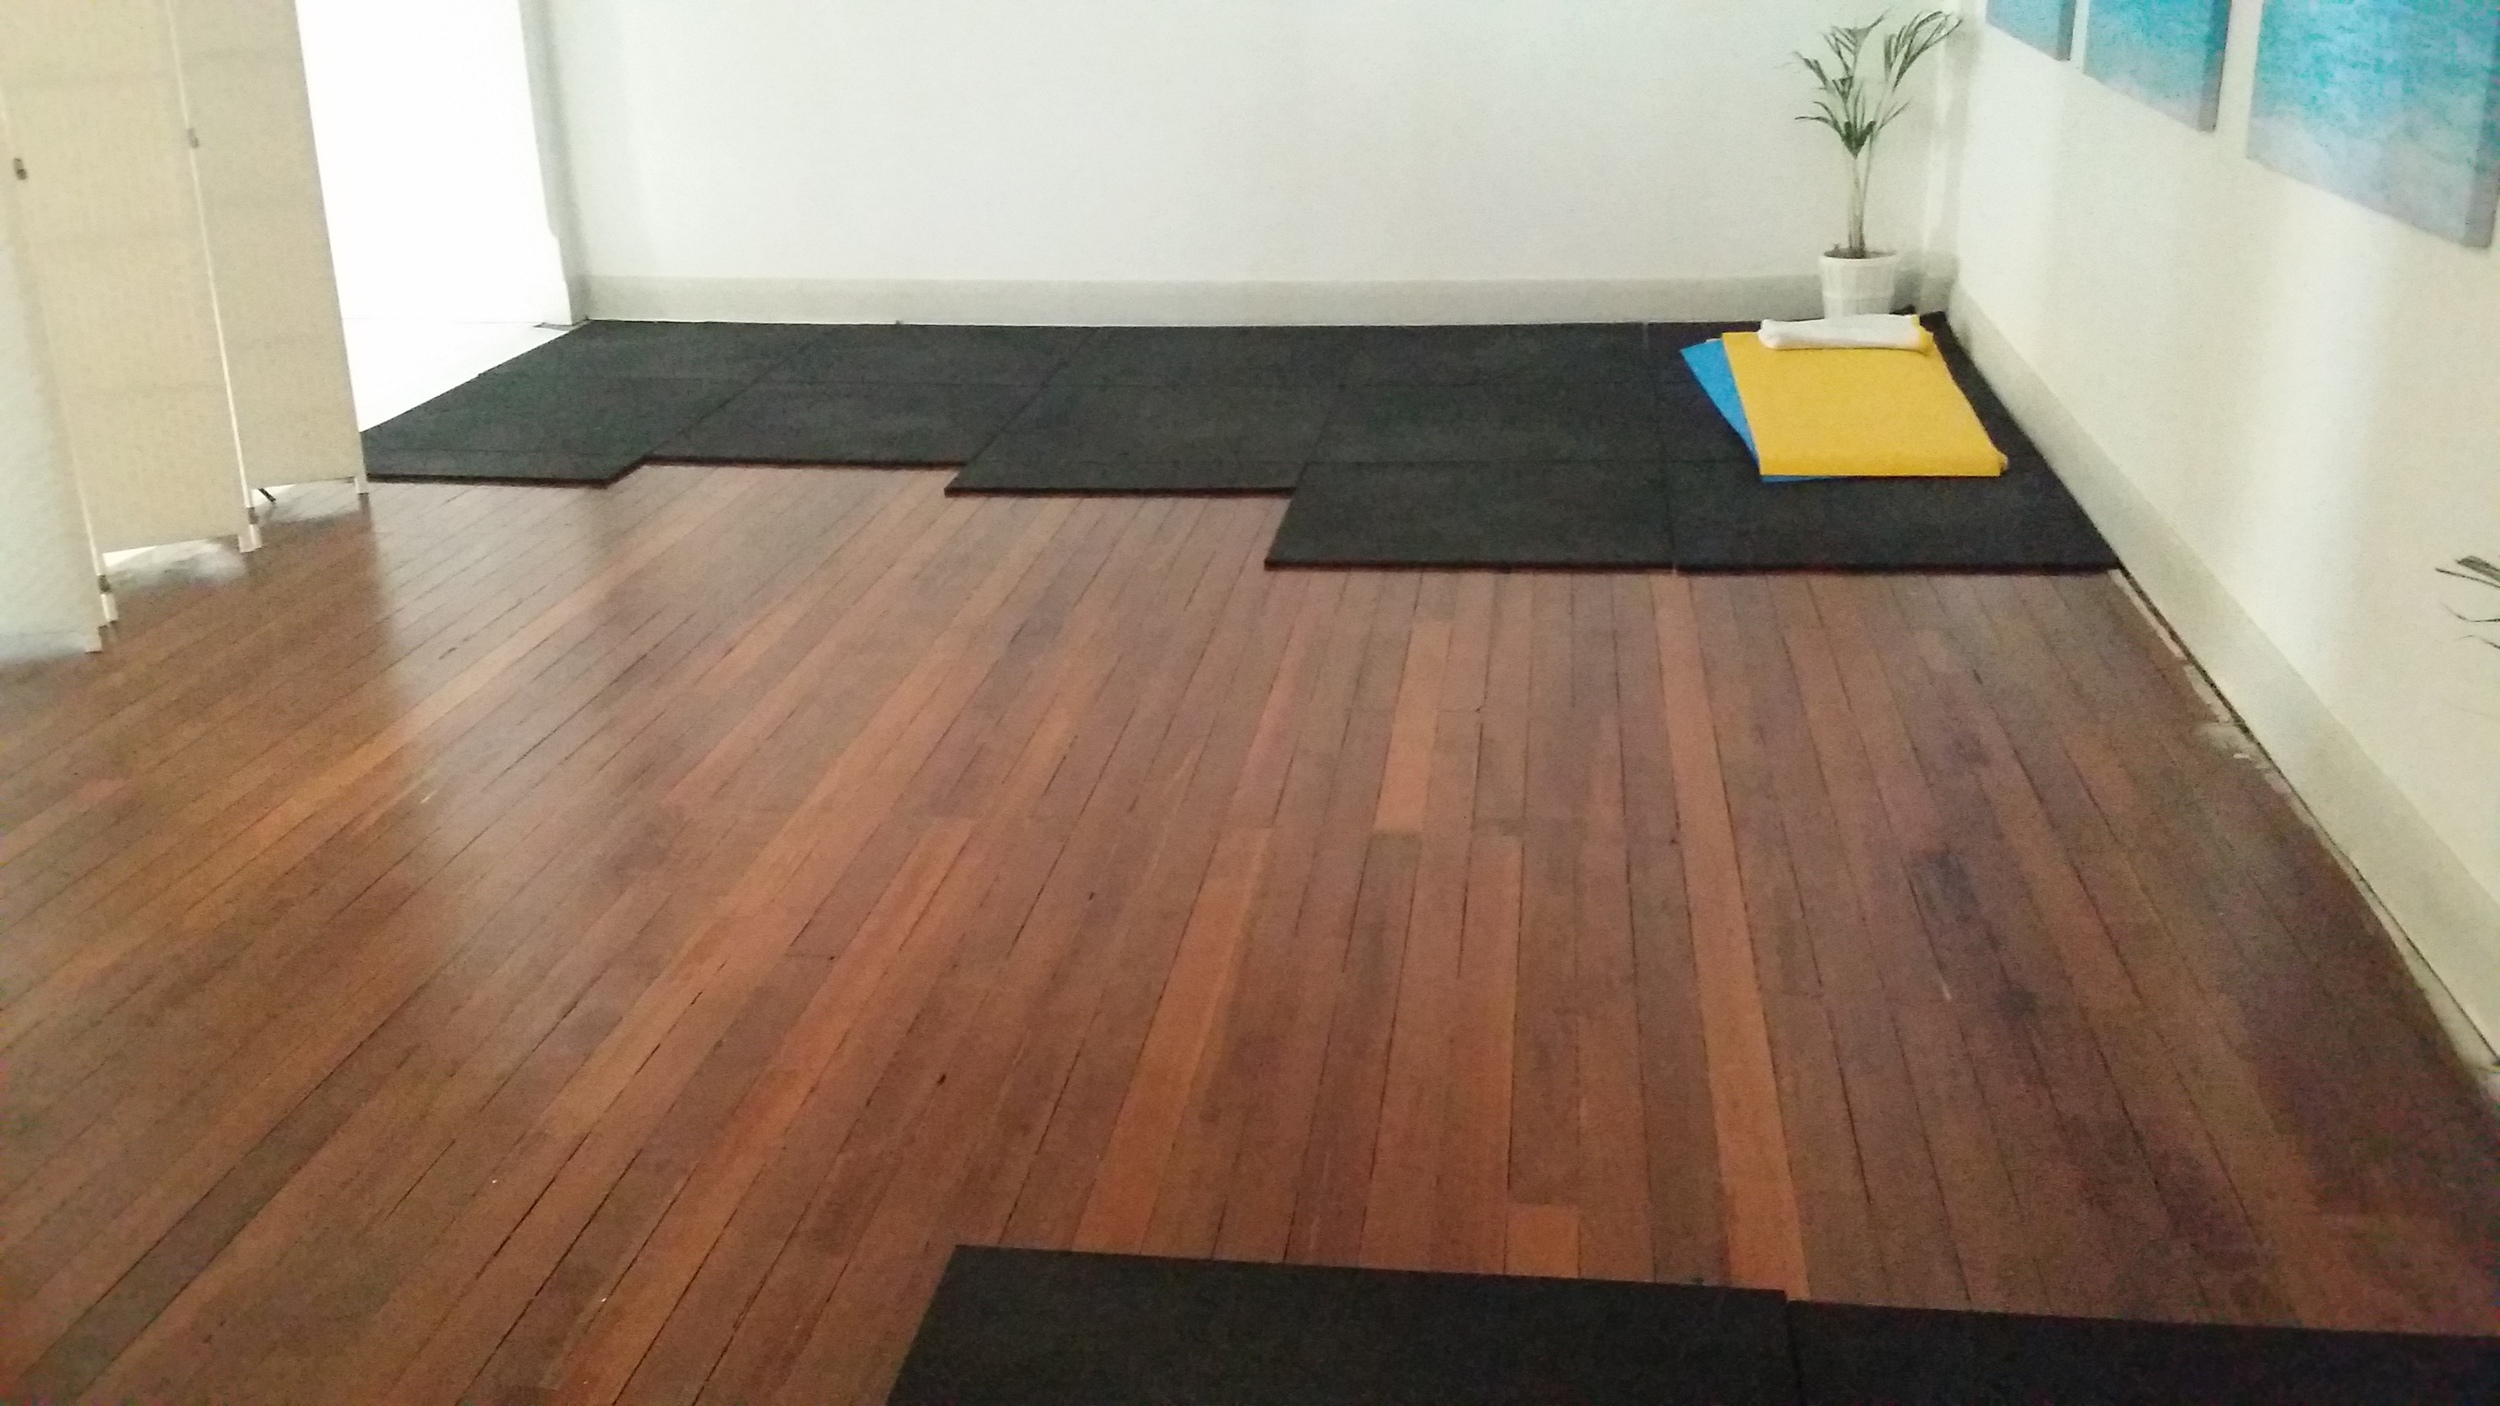 Moov Personal Training Adelaide: Old Studio space about to become new gym space